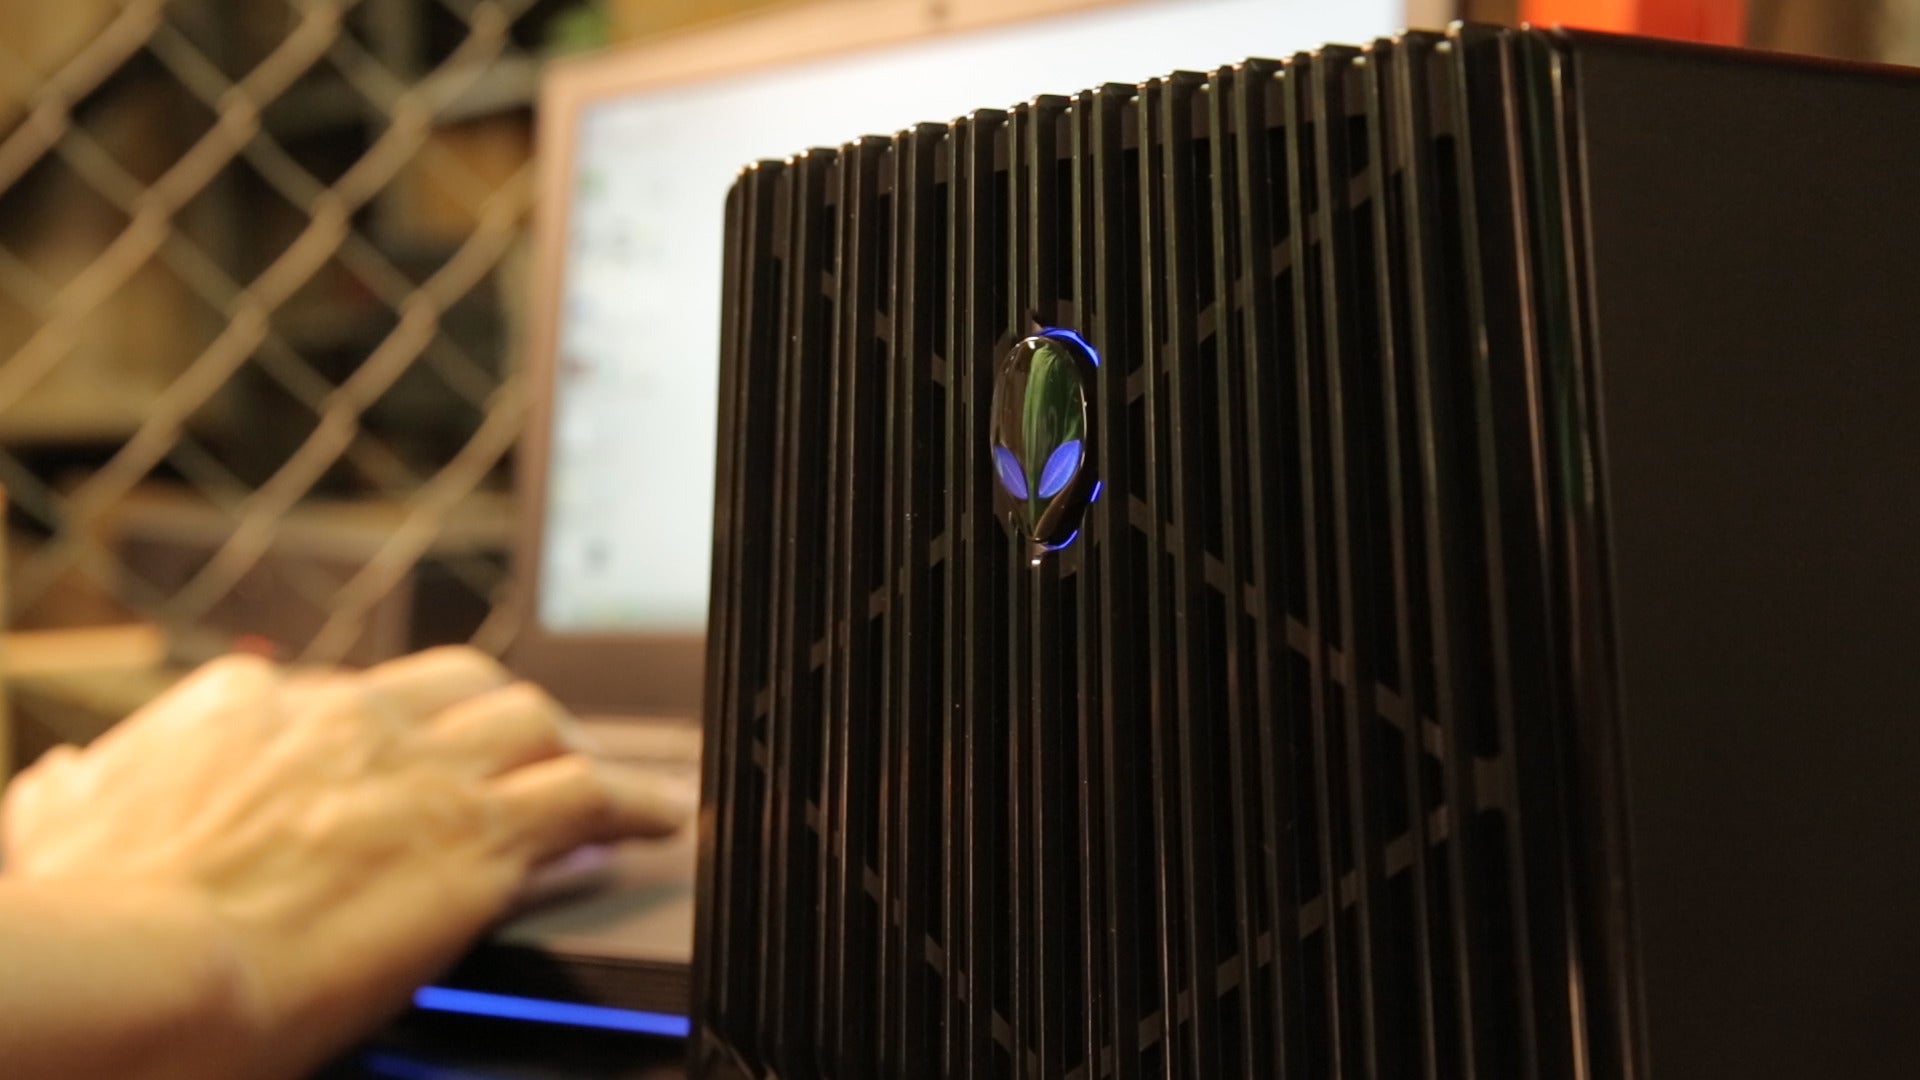 Alienware Graphics Amplifier: It boosts a laptop with Titan X graphics